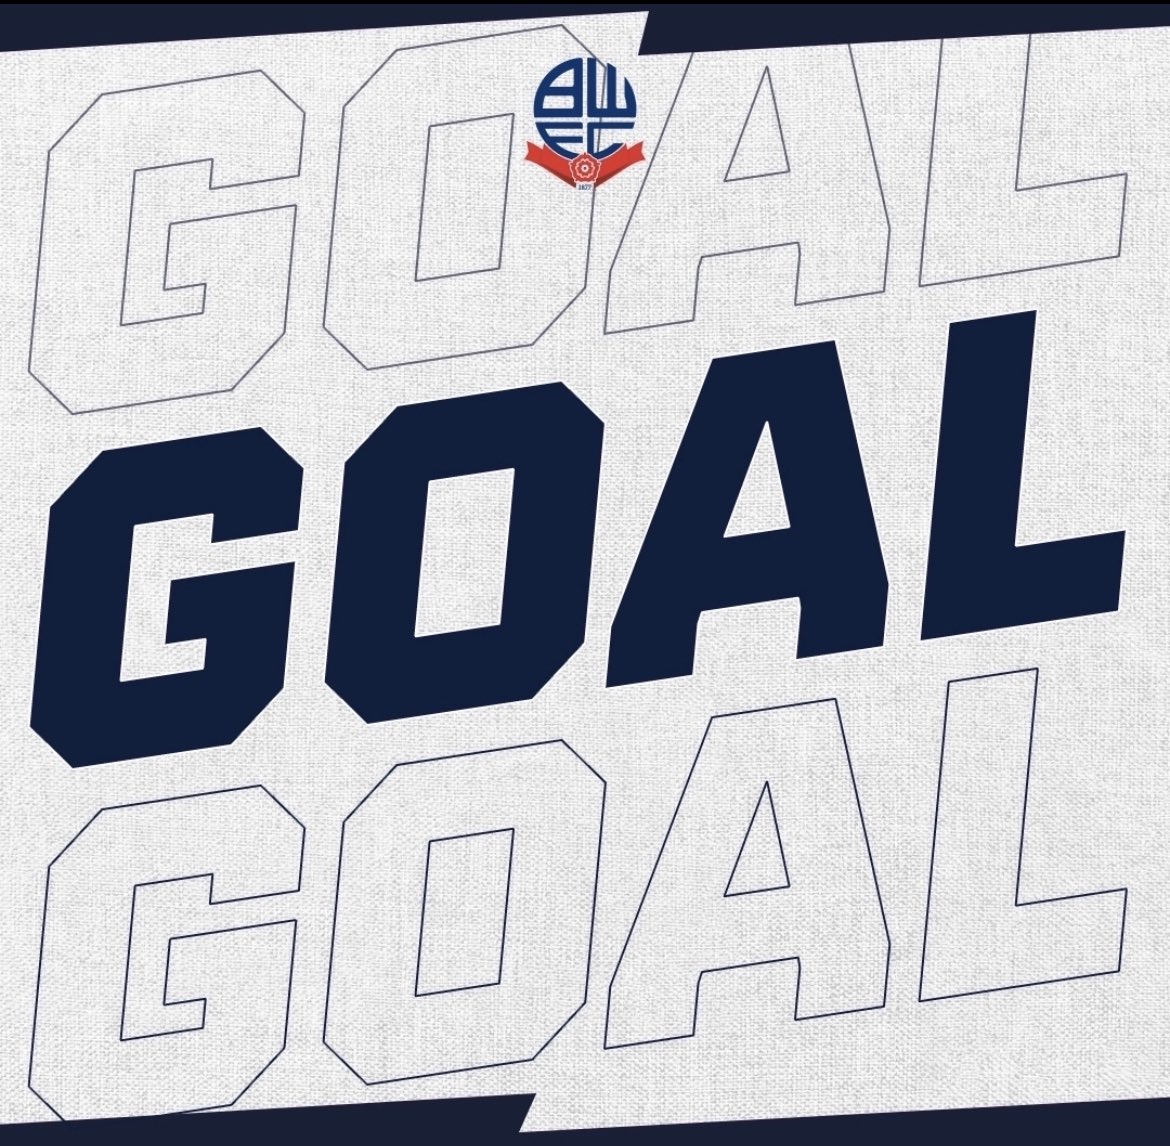 GOALLLL! Wanderers take the lead! Harrison Fleury and David Abimbola combine leaving Oliver Smith with a simple finish at the back post. [0-1] 48’ #bwfc